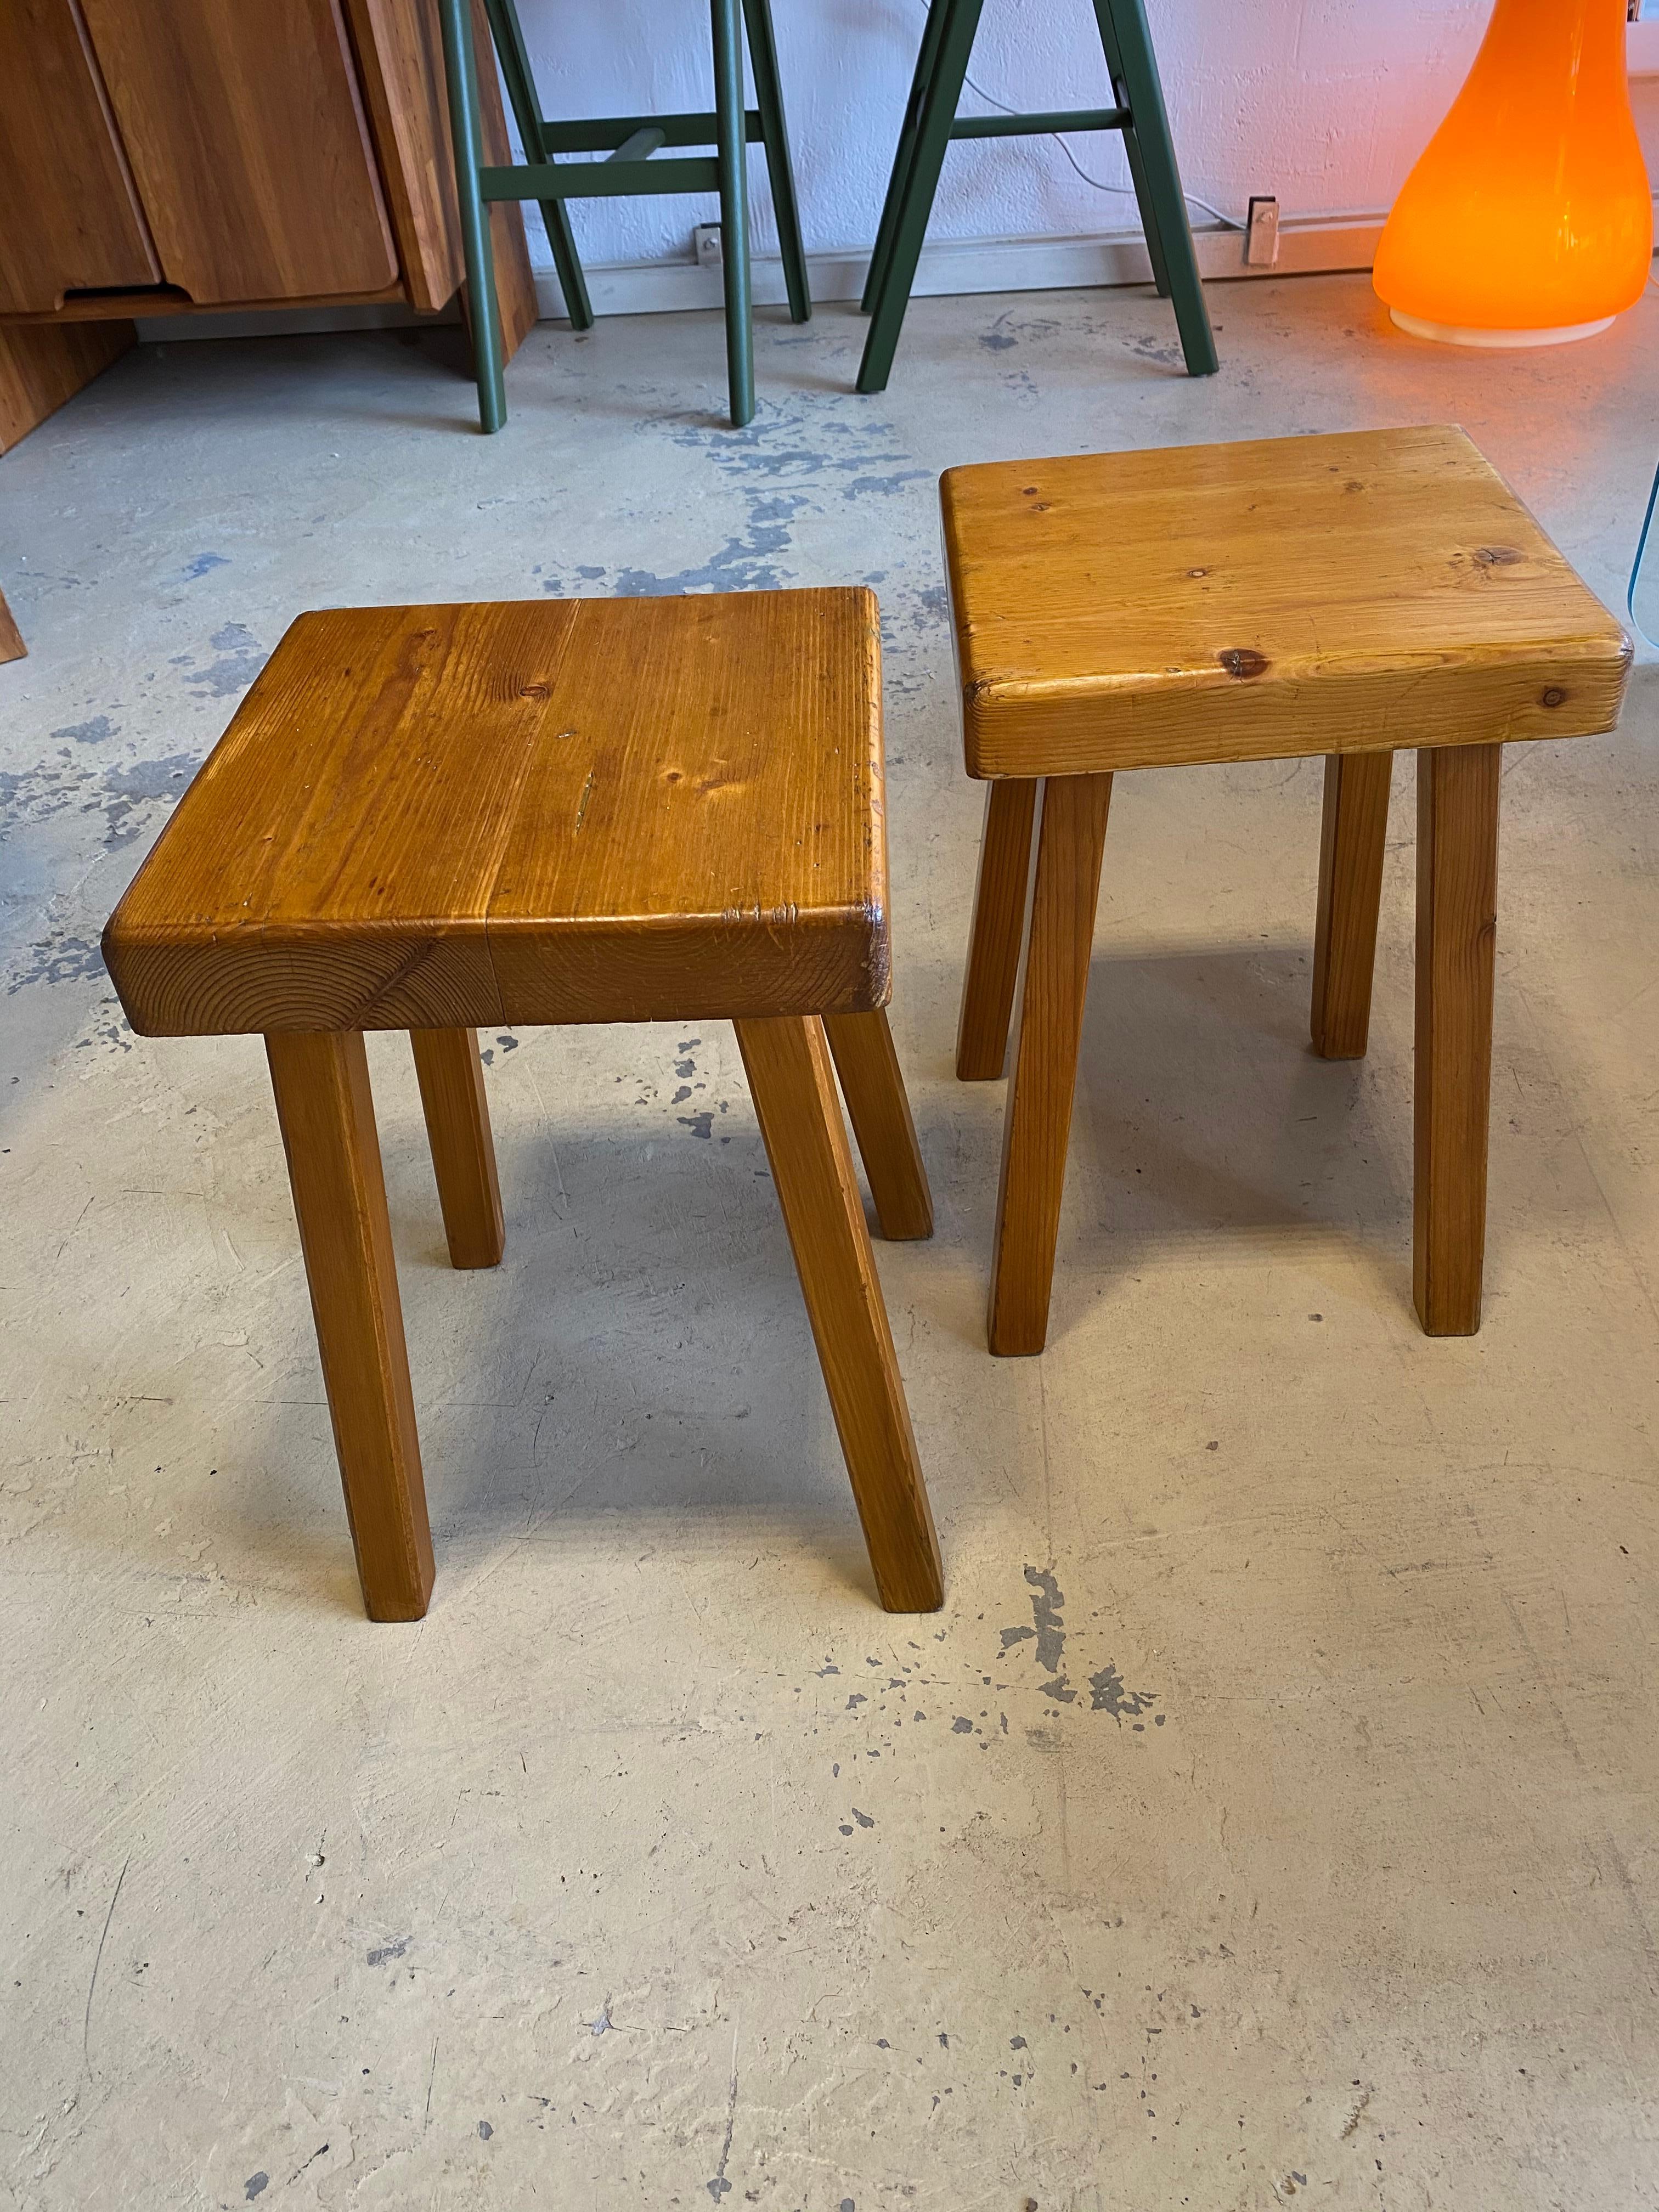 Wood Charlotte Perriand's Square Stools